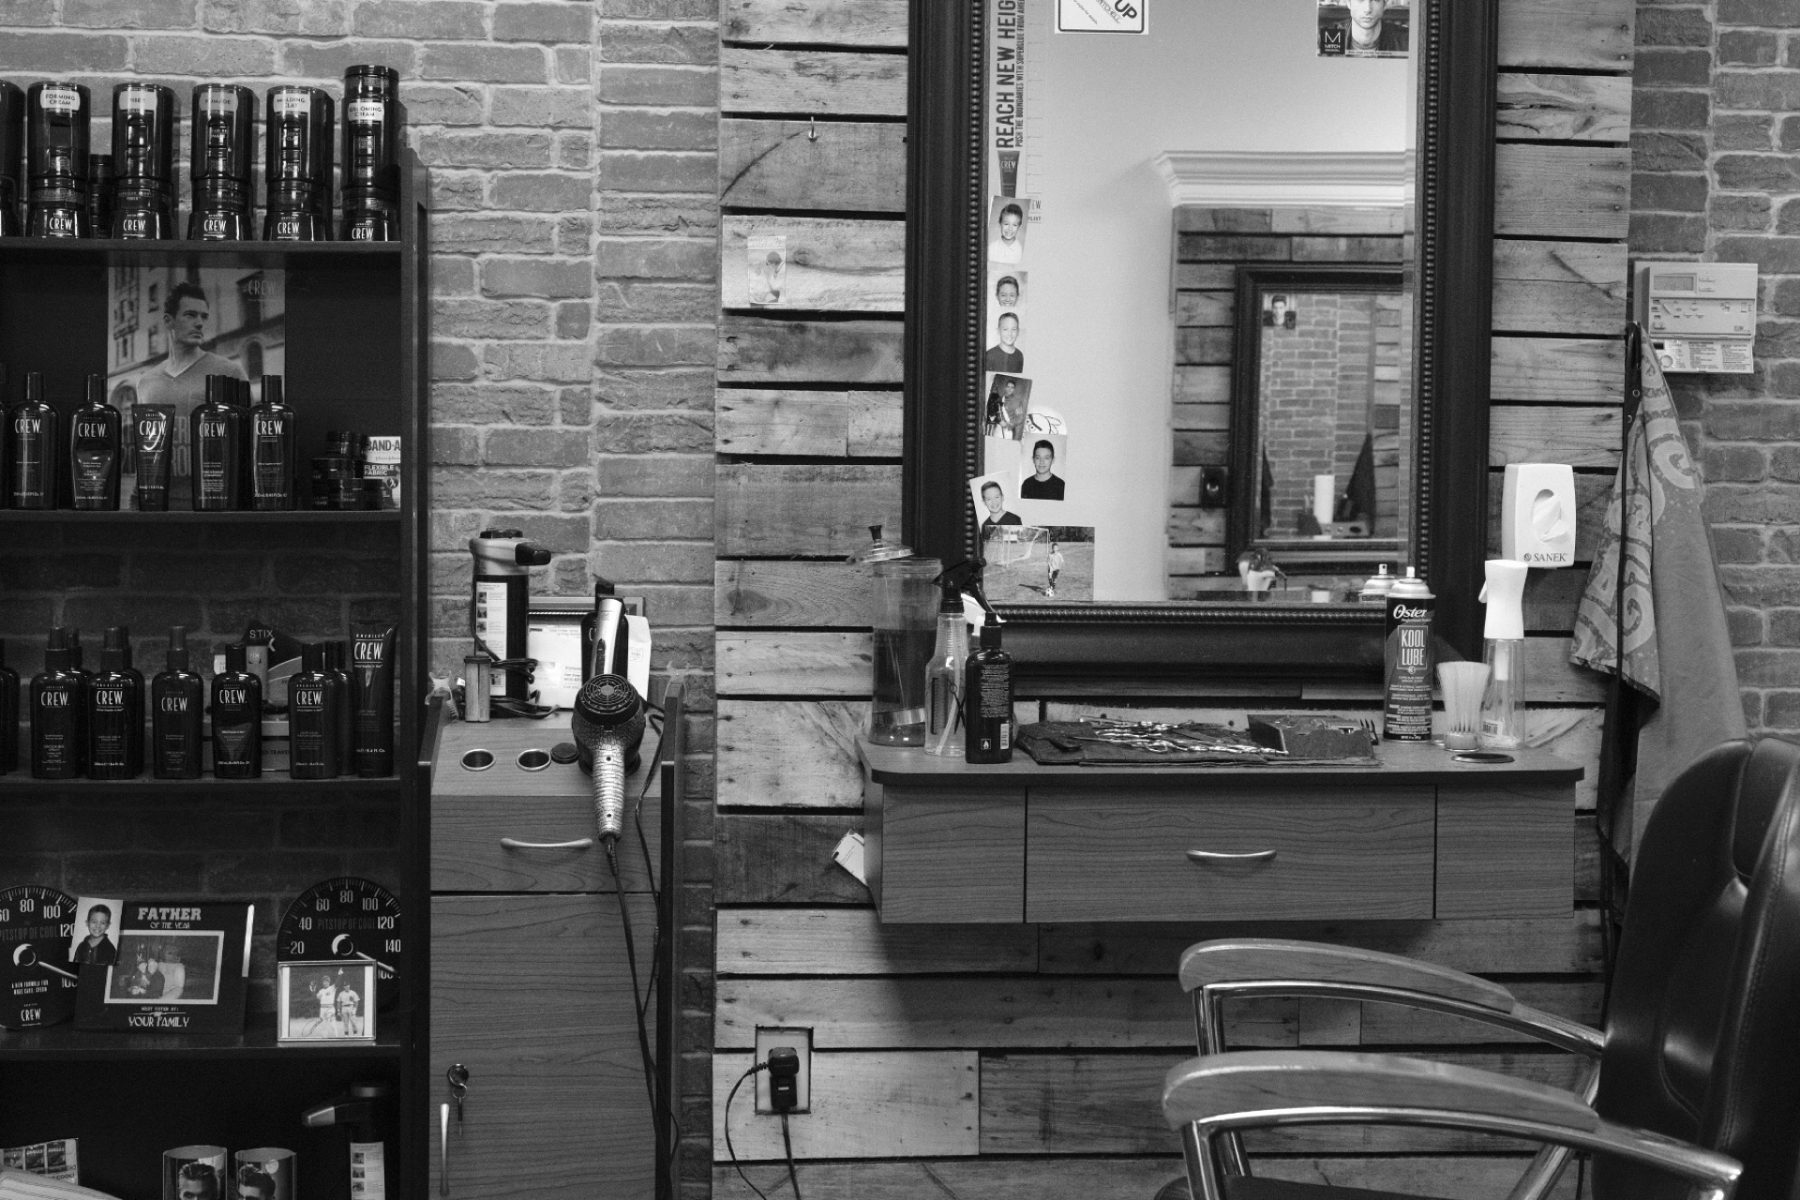 Checked in at MetroMale Barbering II